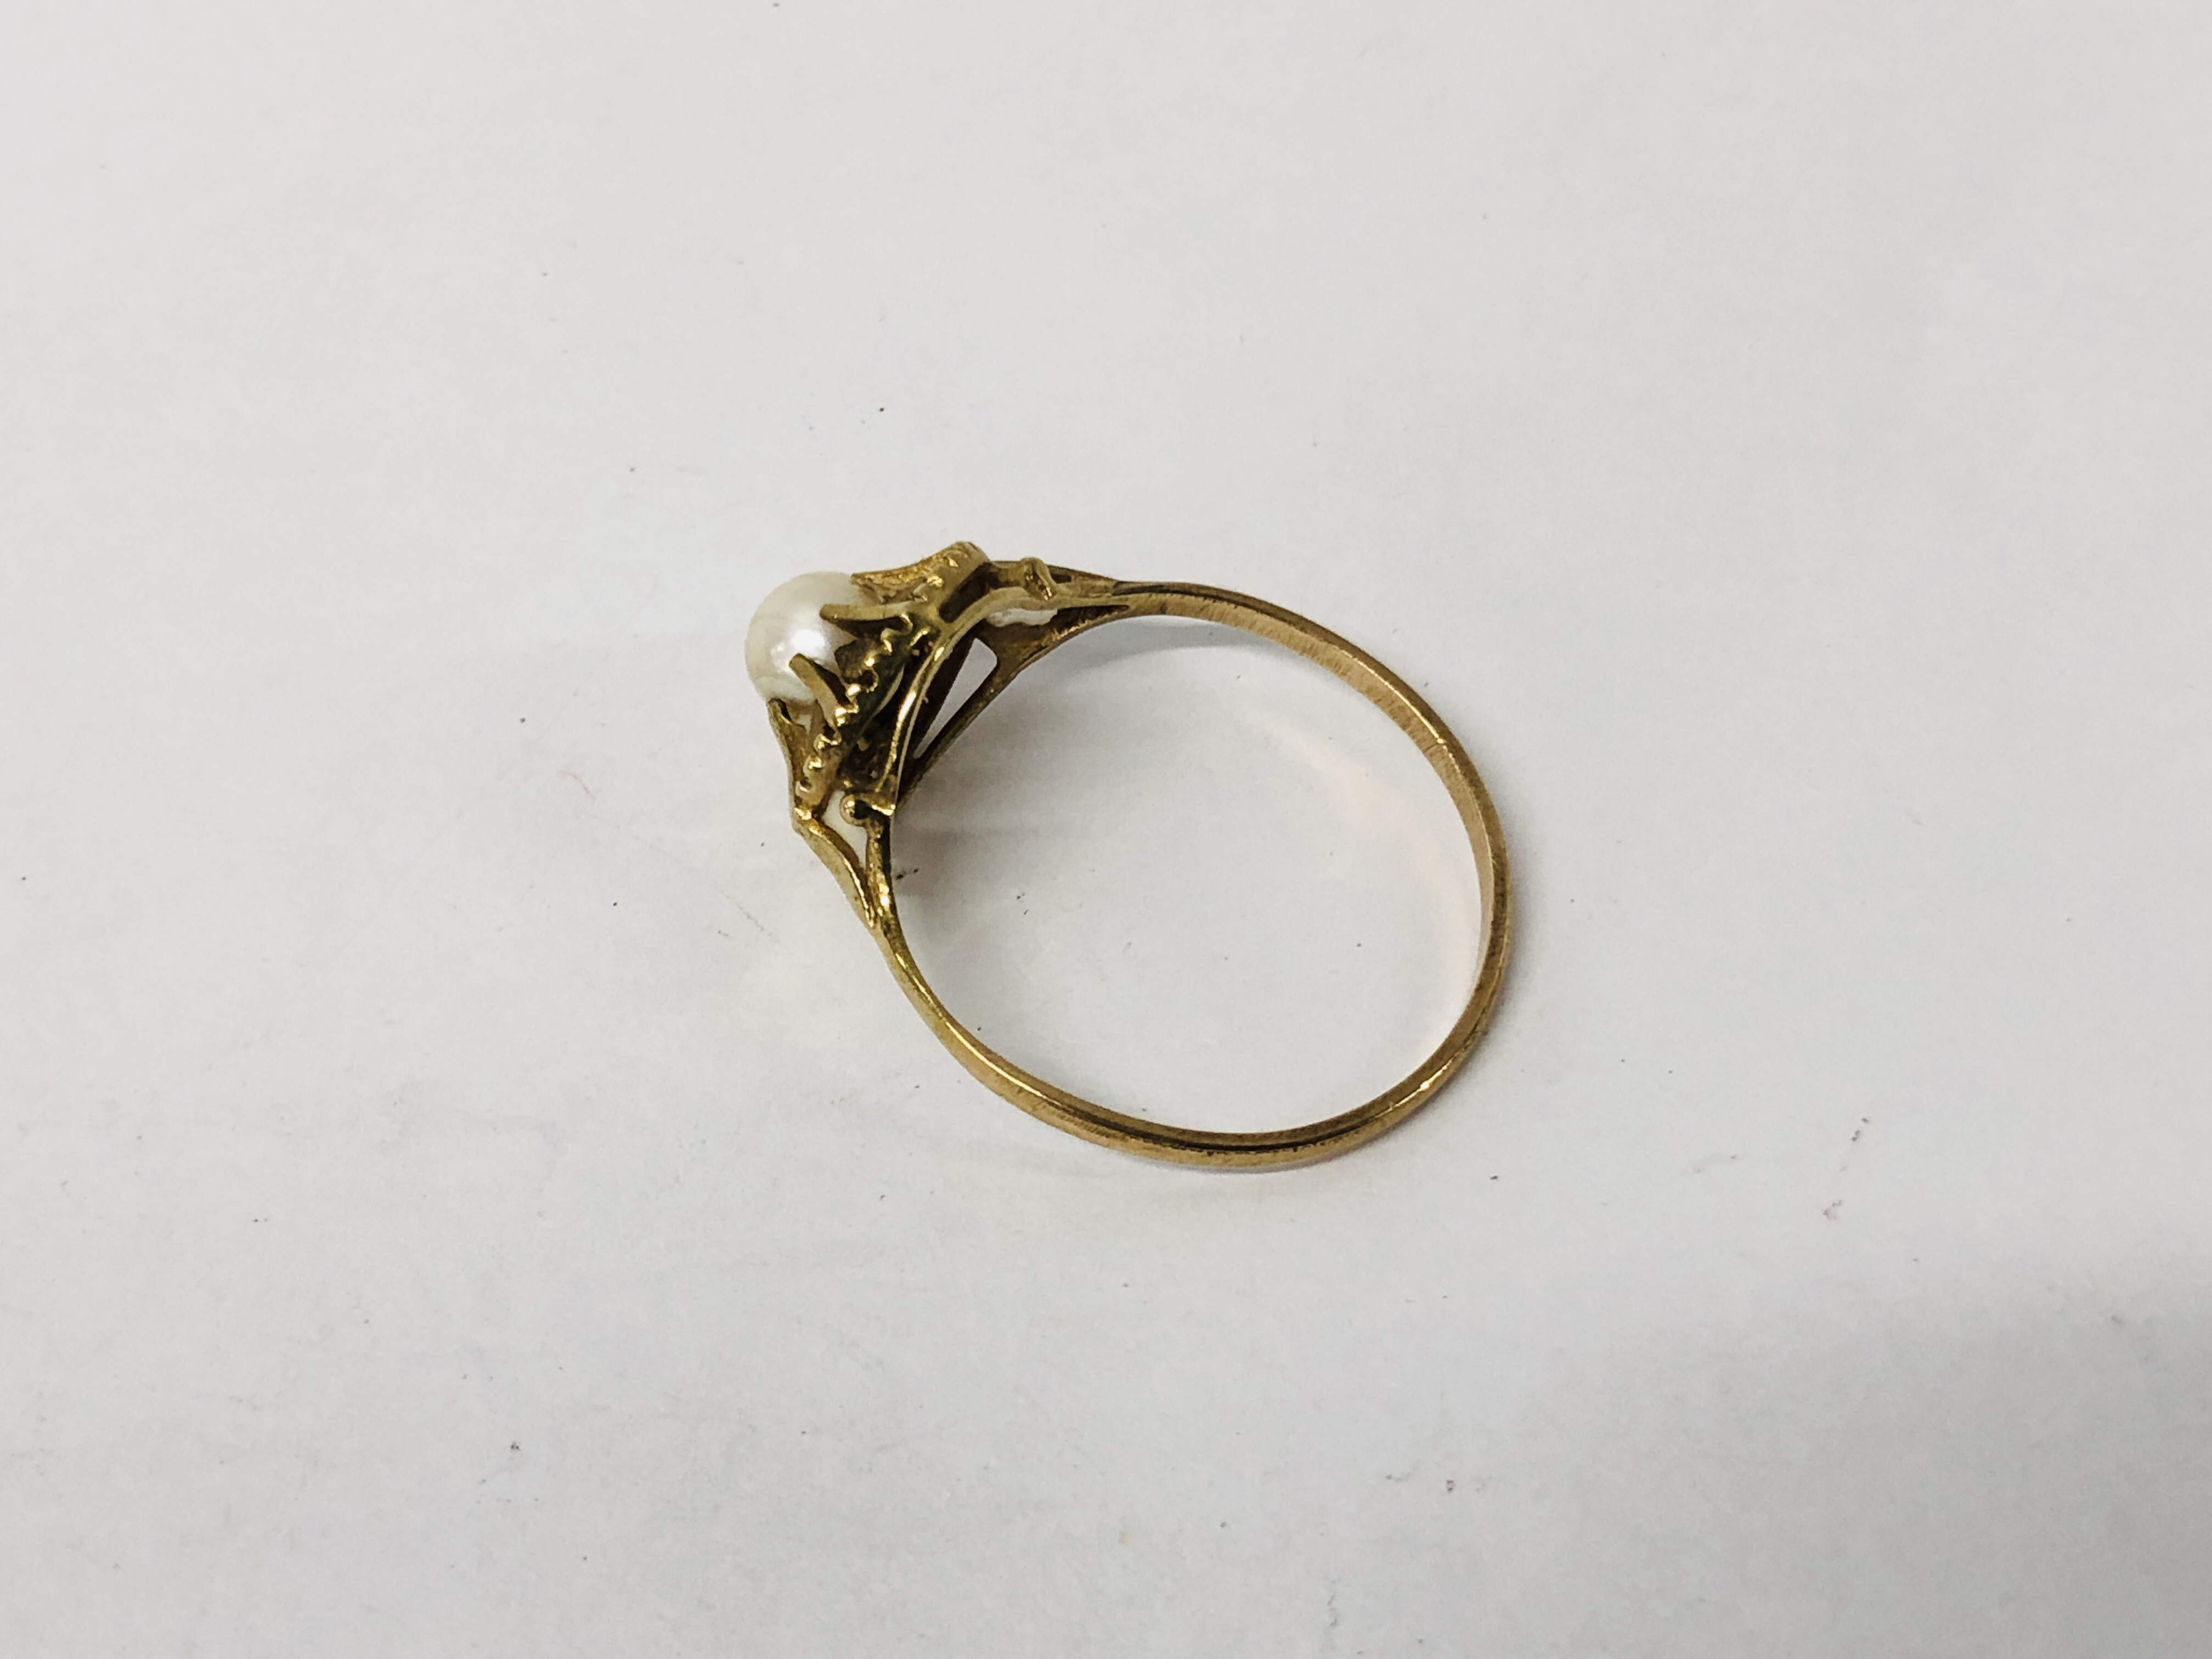 A PEARL RING, A SINGLE CLAW SET STONE, ON AN UNMARKED YELLOW METAL BAND. - Image 5 of 8